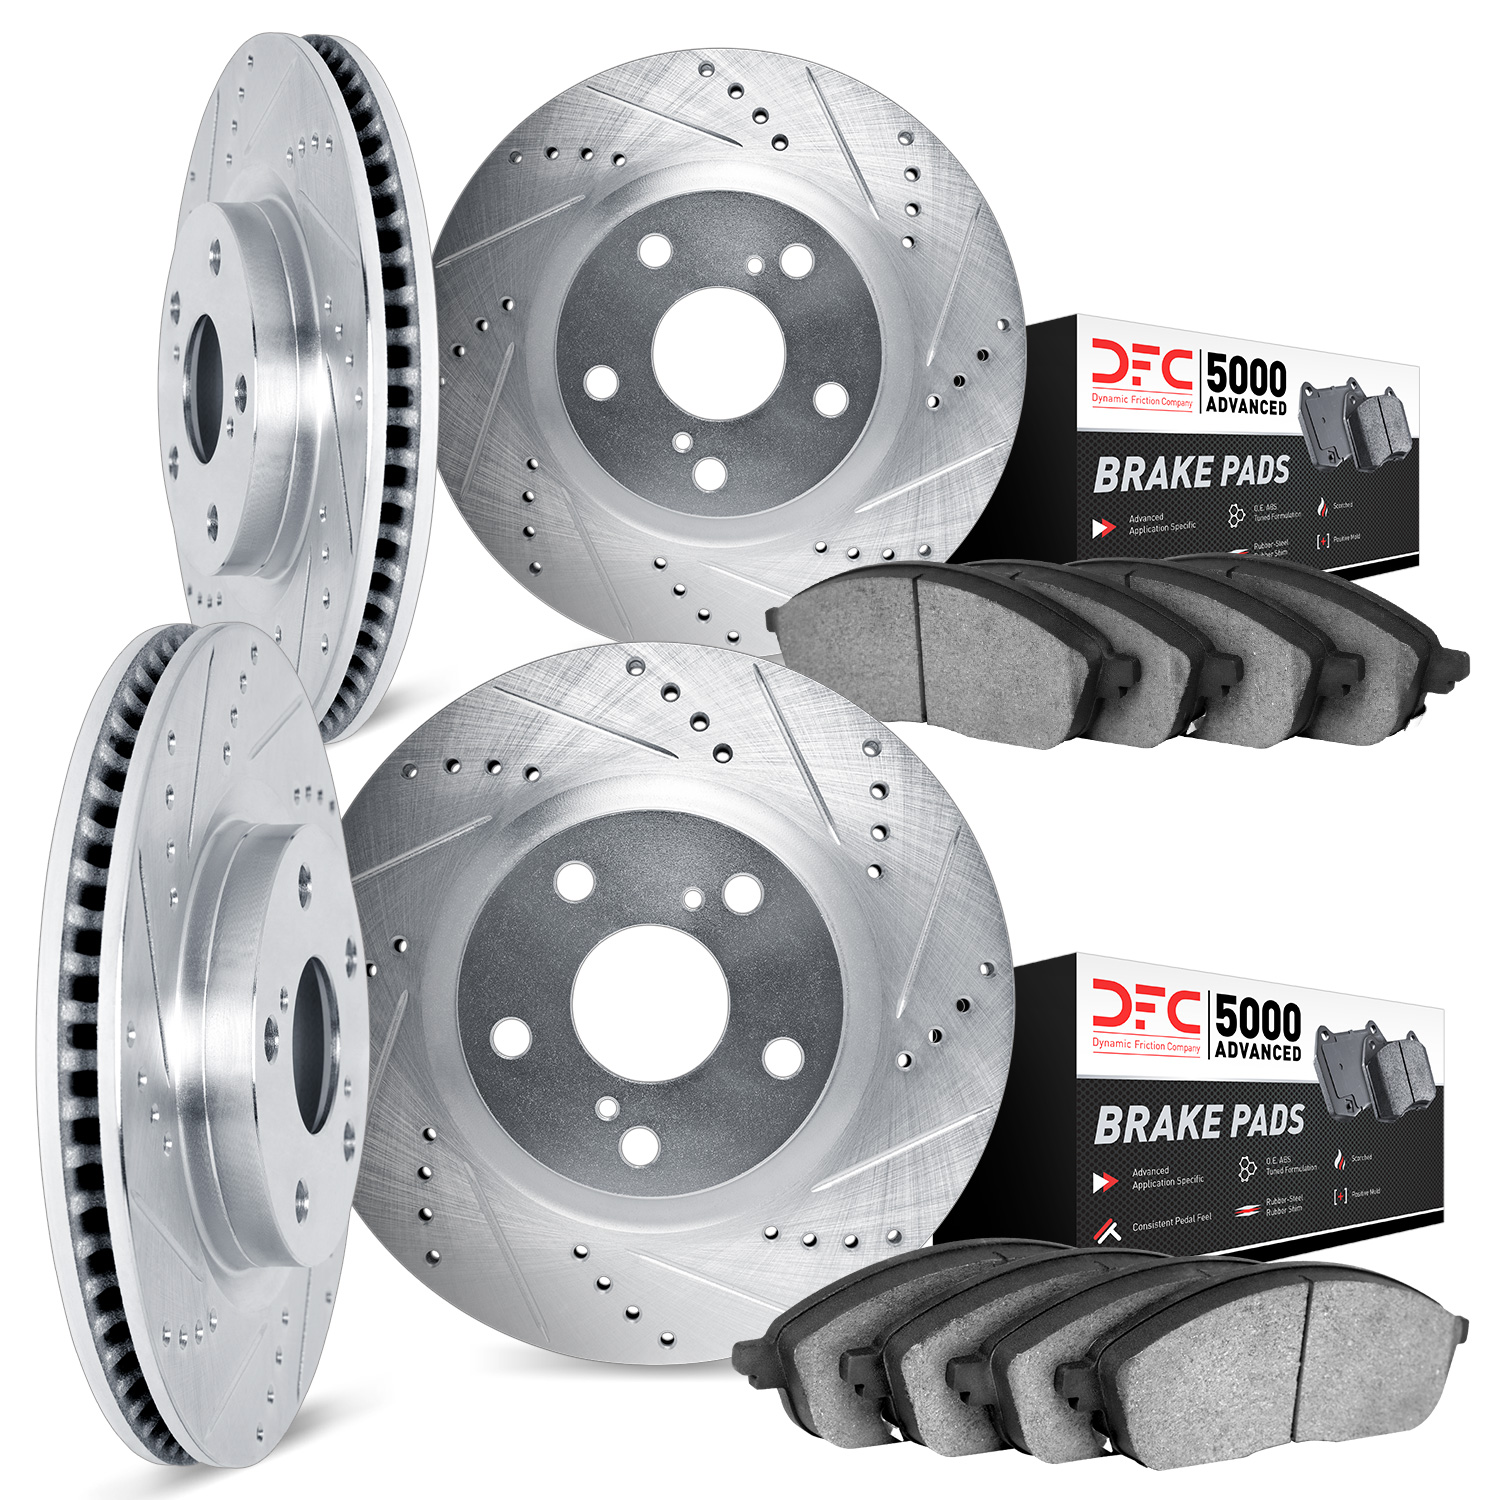 7504-74079 Drilled/Slotted Brake Rotors w/5000 Advanced Brake Pads Kit [Silver], 2011-2014 Audi/Volkswagen, Position: Front and